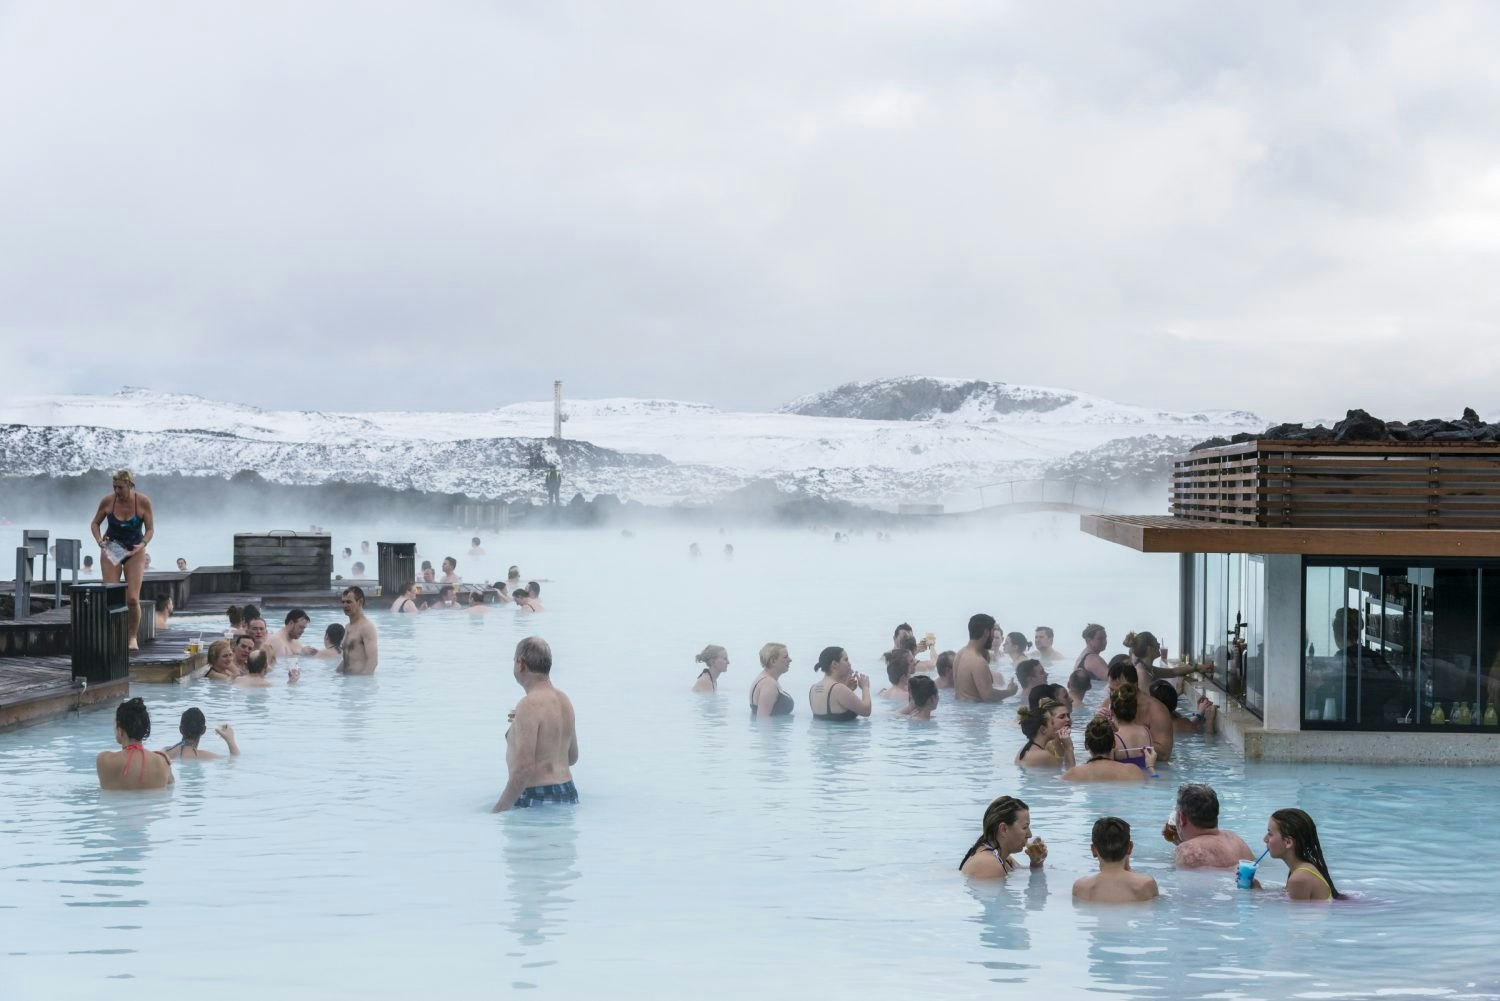 People bathing in a lake in Iceland